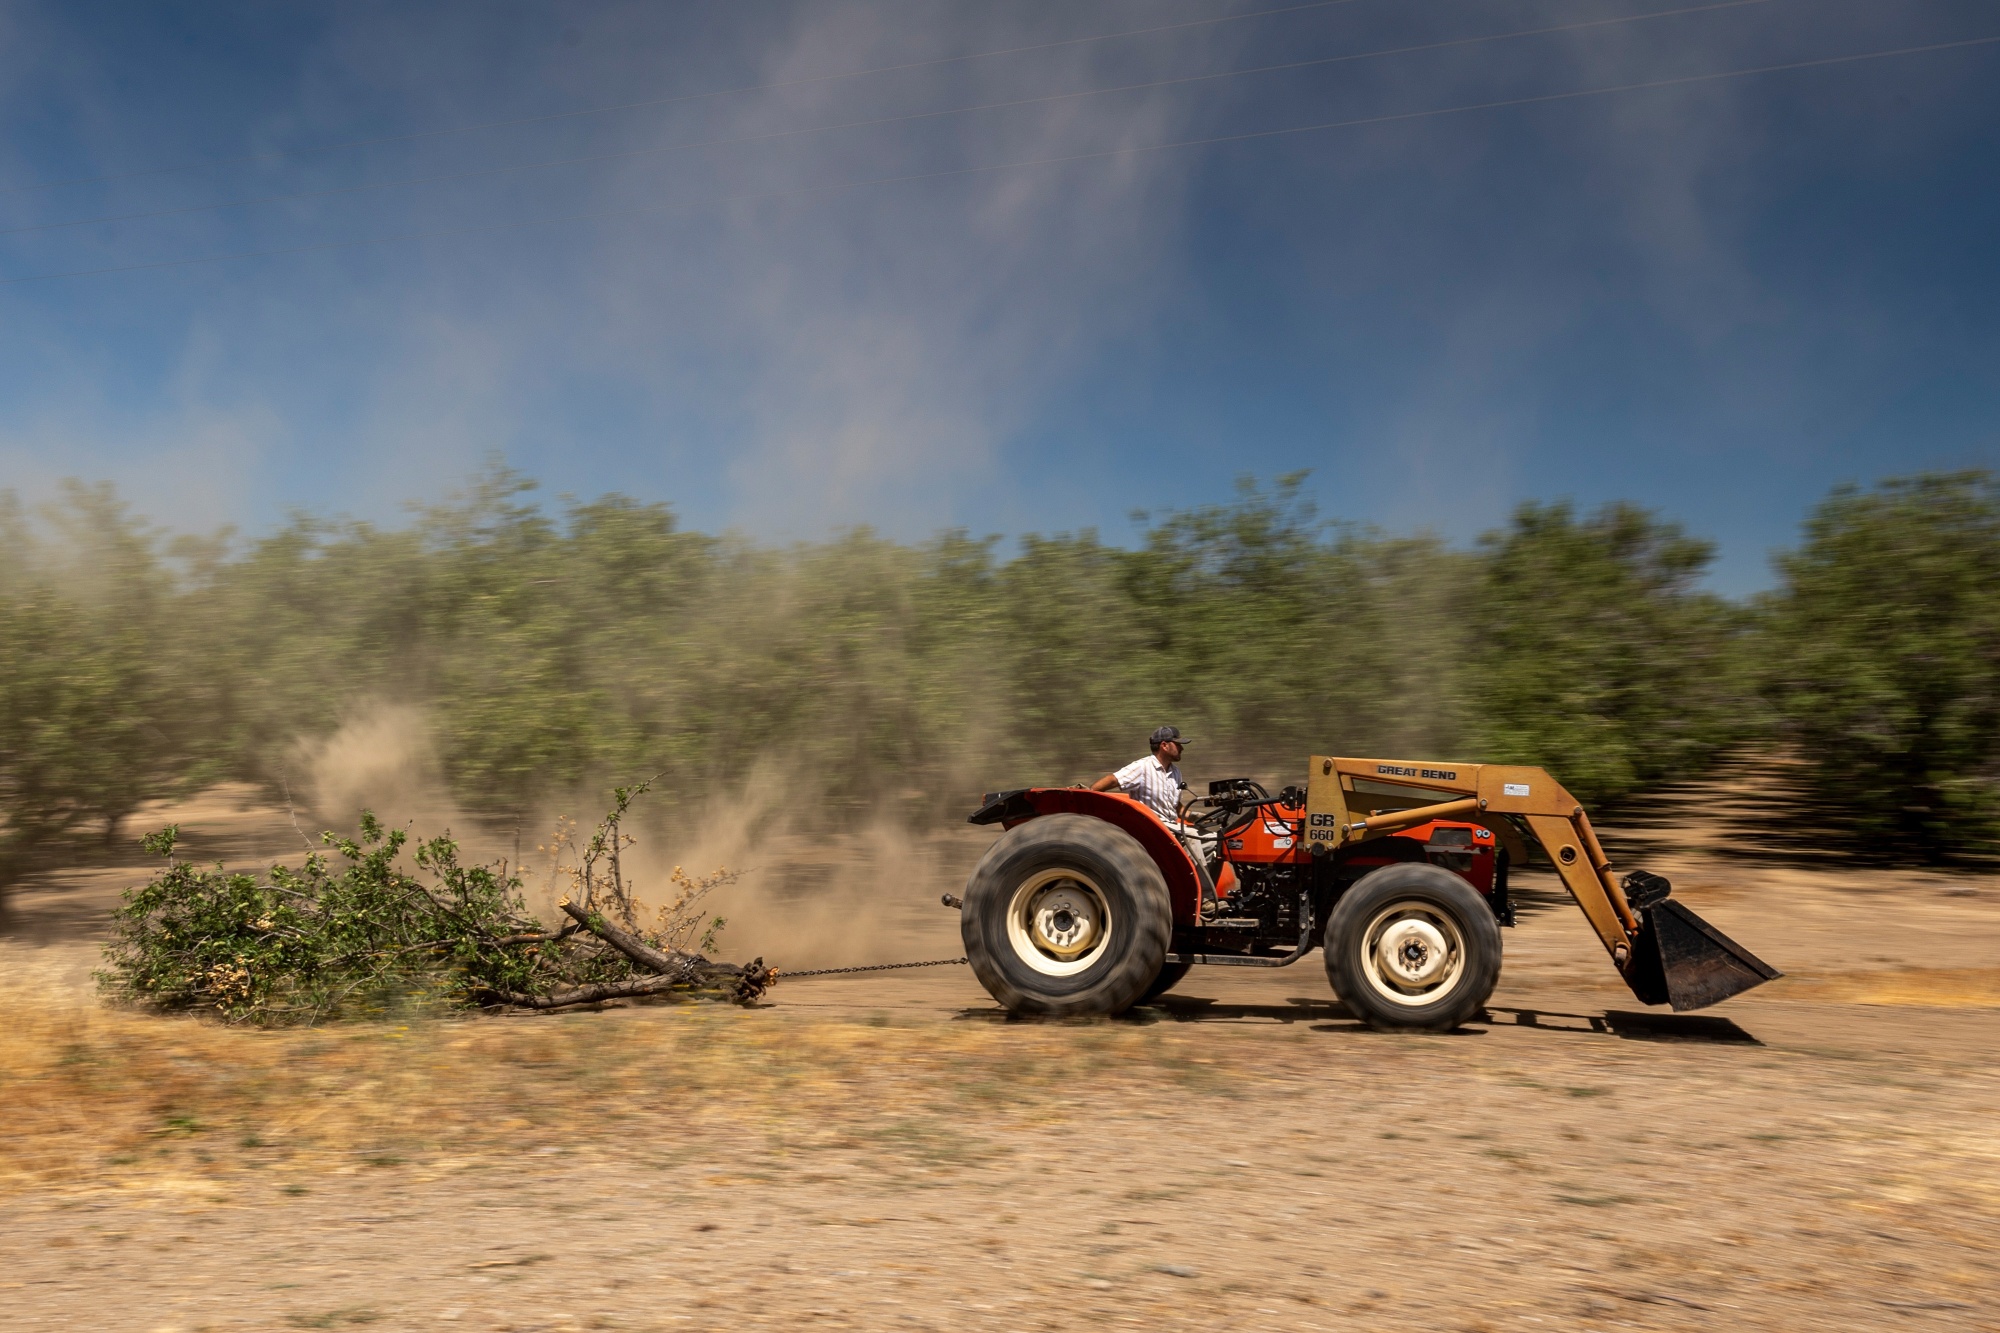 In Gustine, California, almond farmer Erich Gemperle clears a wind-felled tree with his tractor.